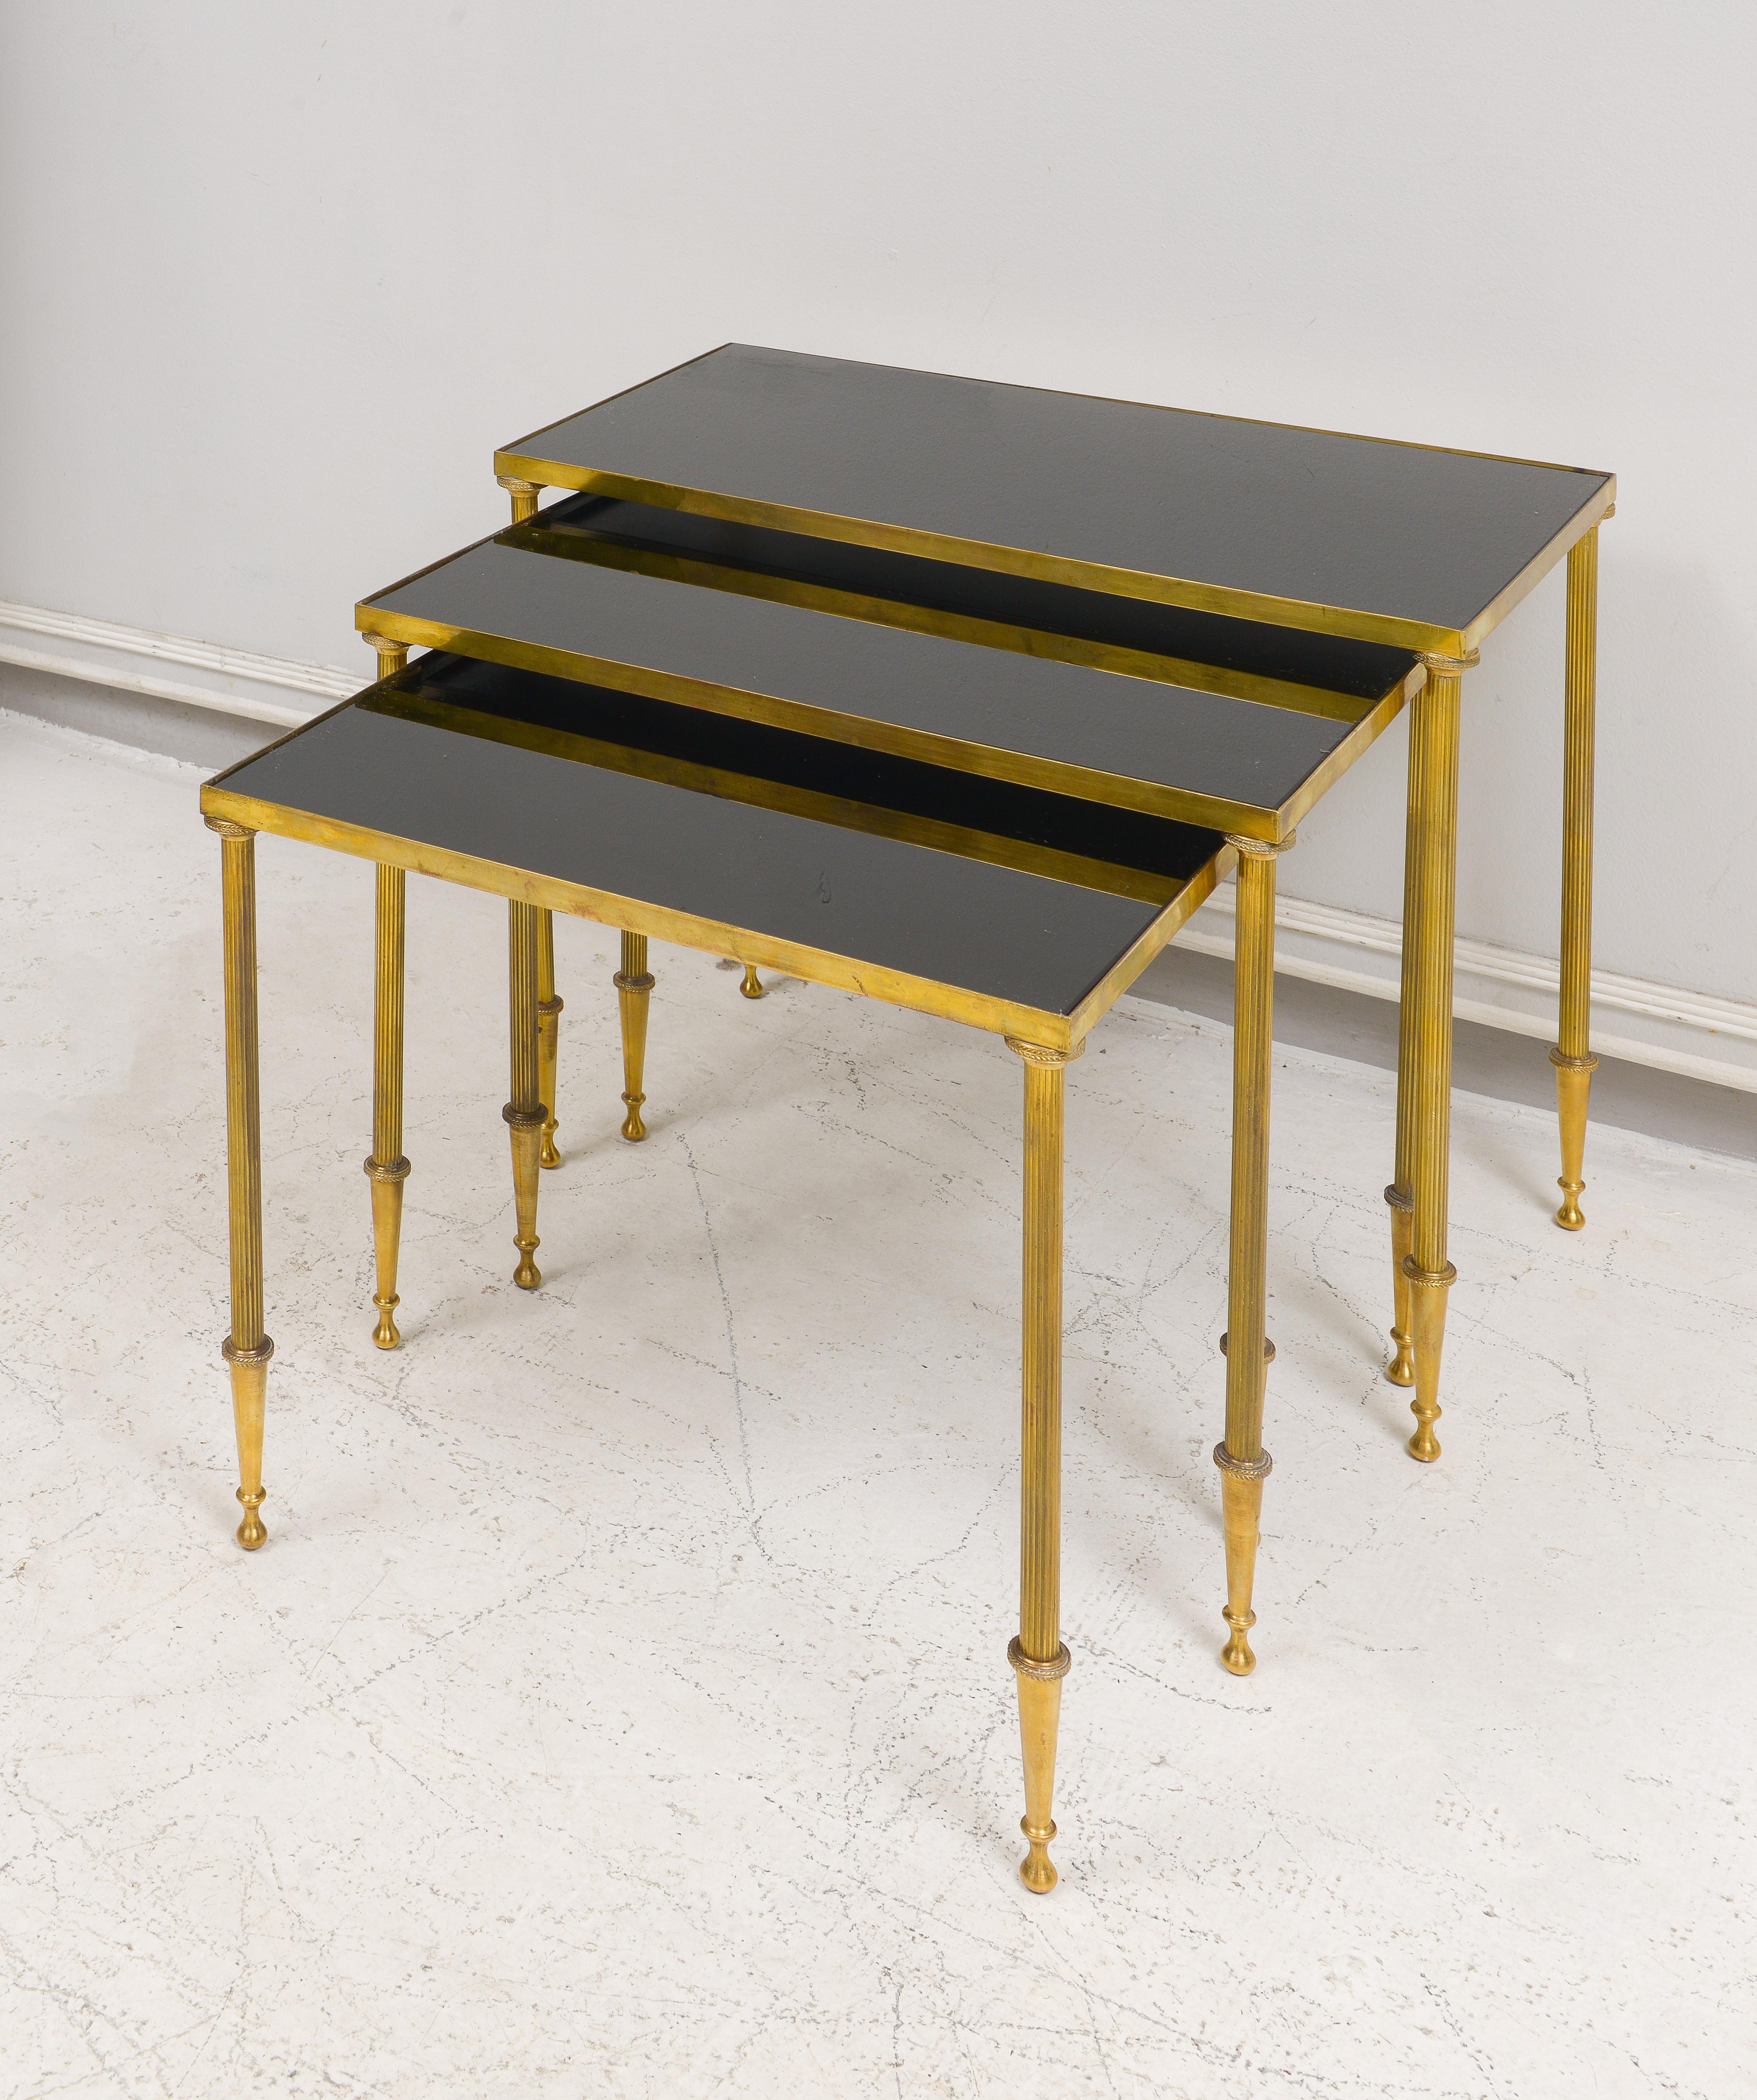 Fine Quality French Brass Nesting Tables in the Directoire Manner on Reeded Legs with Black Glass. Set of 3.
Dimensions of each table:
Large:  H 17.25